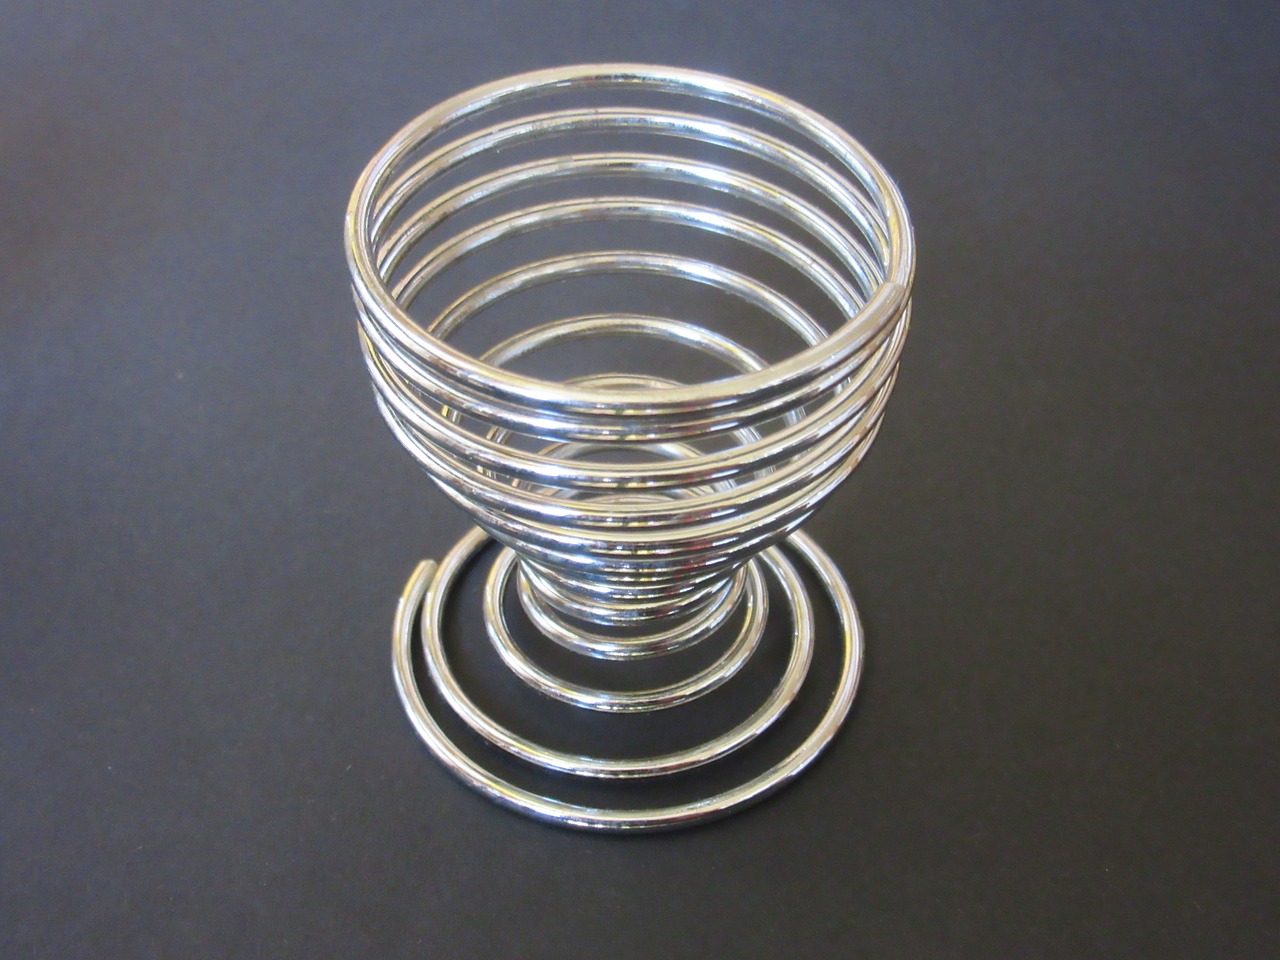 egg cups wire chrome plated free photo